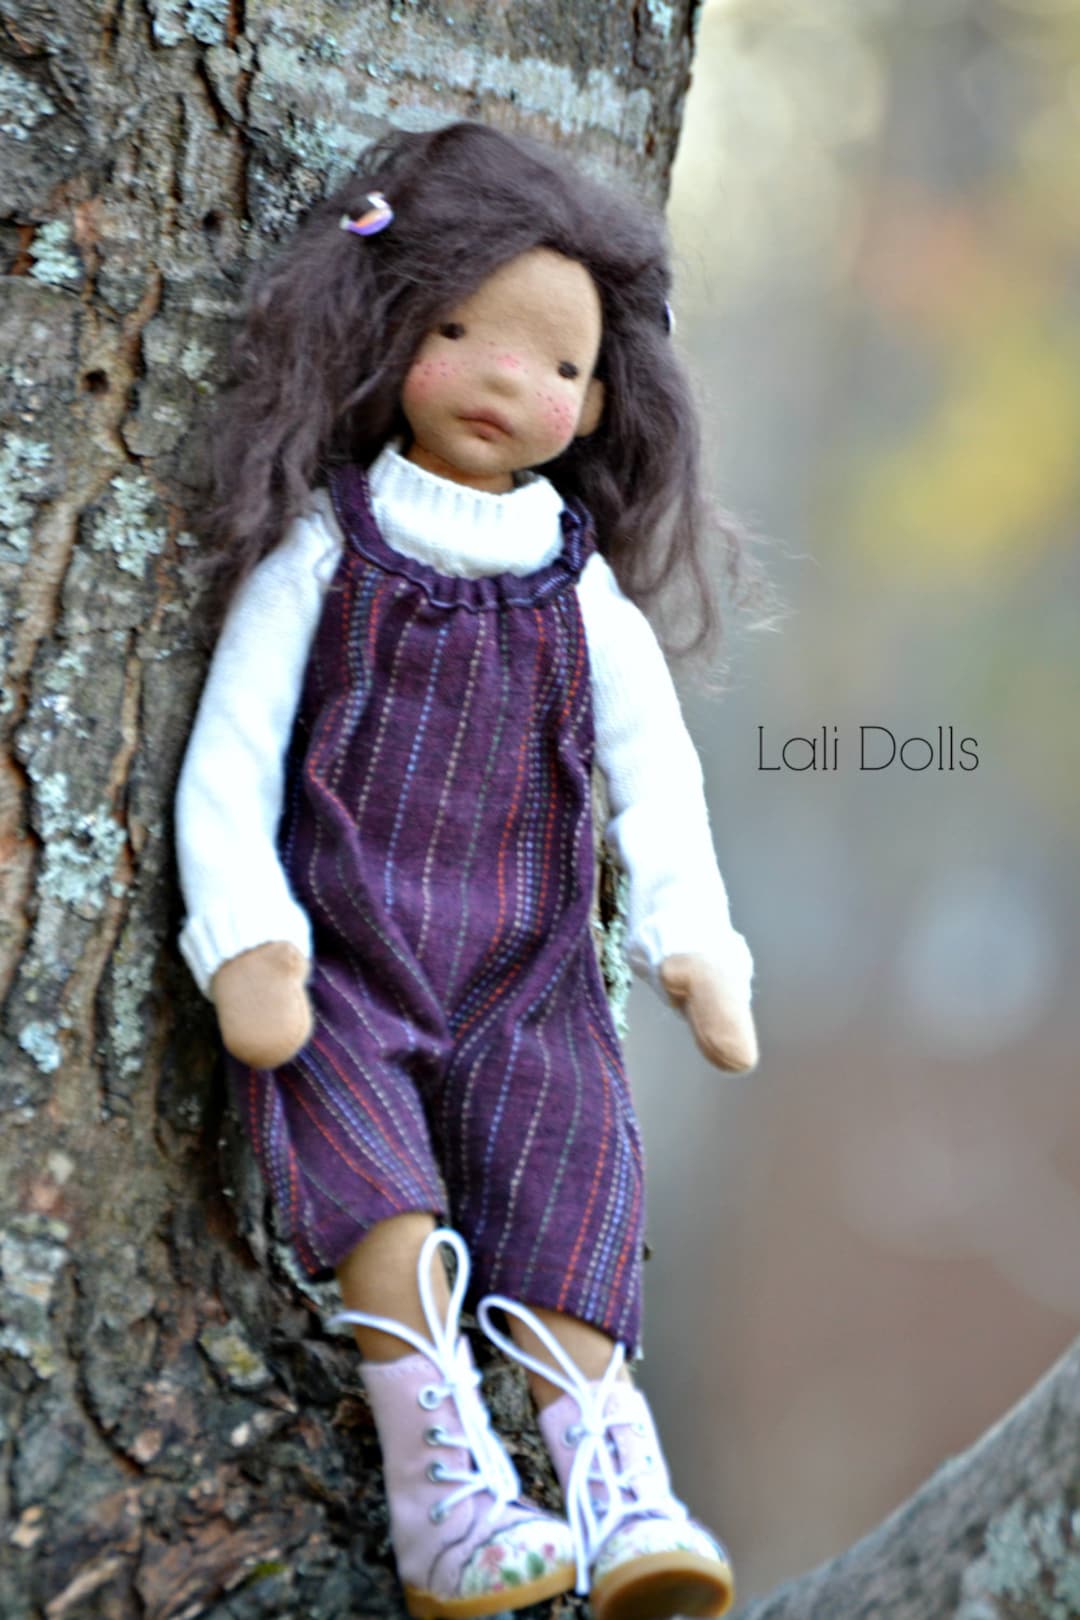 ALL DOLL WIGS / HEADWEAR : Fabric Friends Doll Shop - Ball Jointed